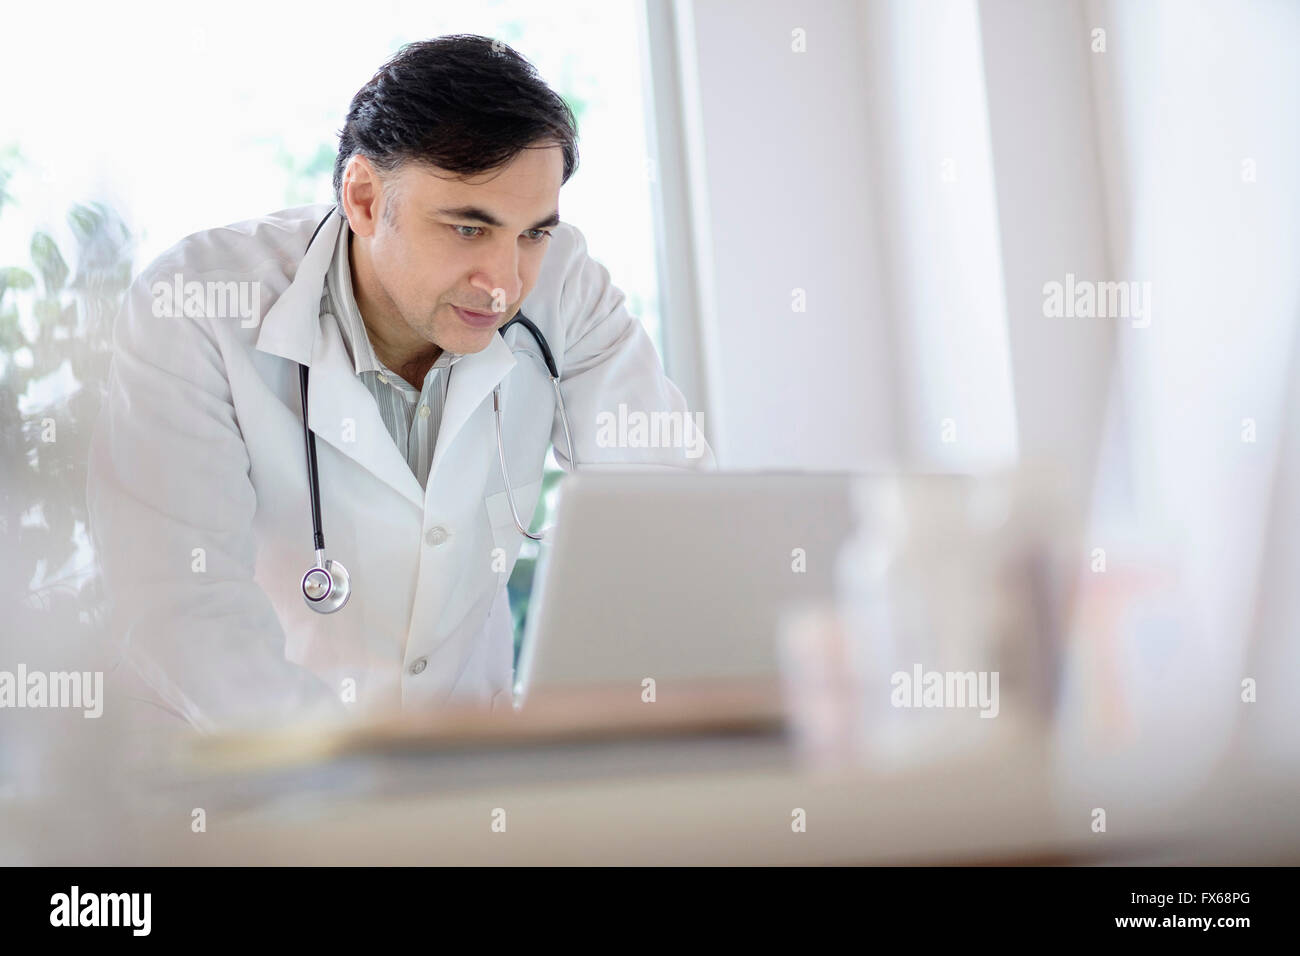 Mixed race doctor working on laptop Stock Photo